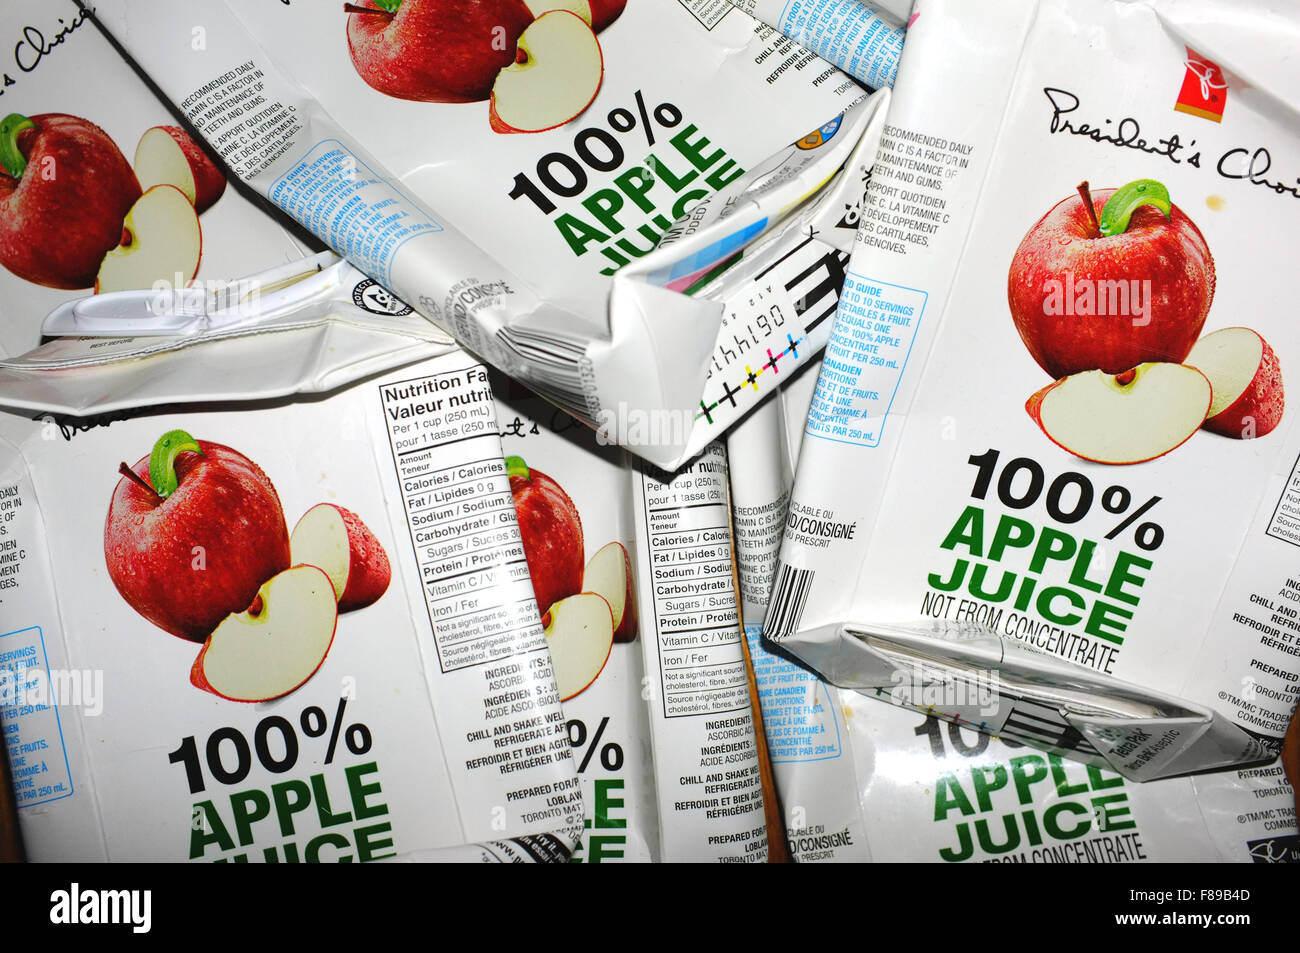 A pile of used apple juice cartons. Stock Photo